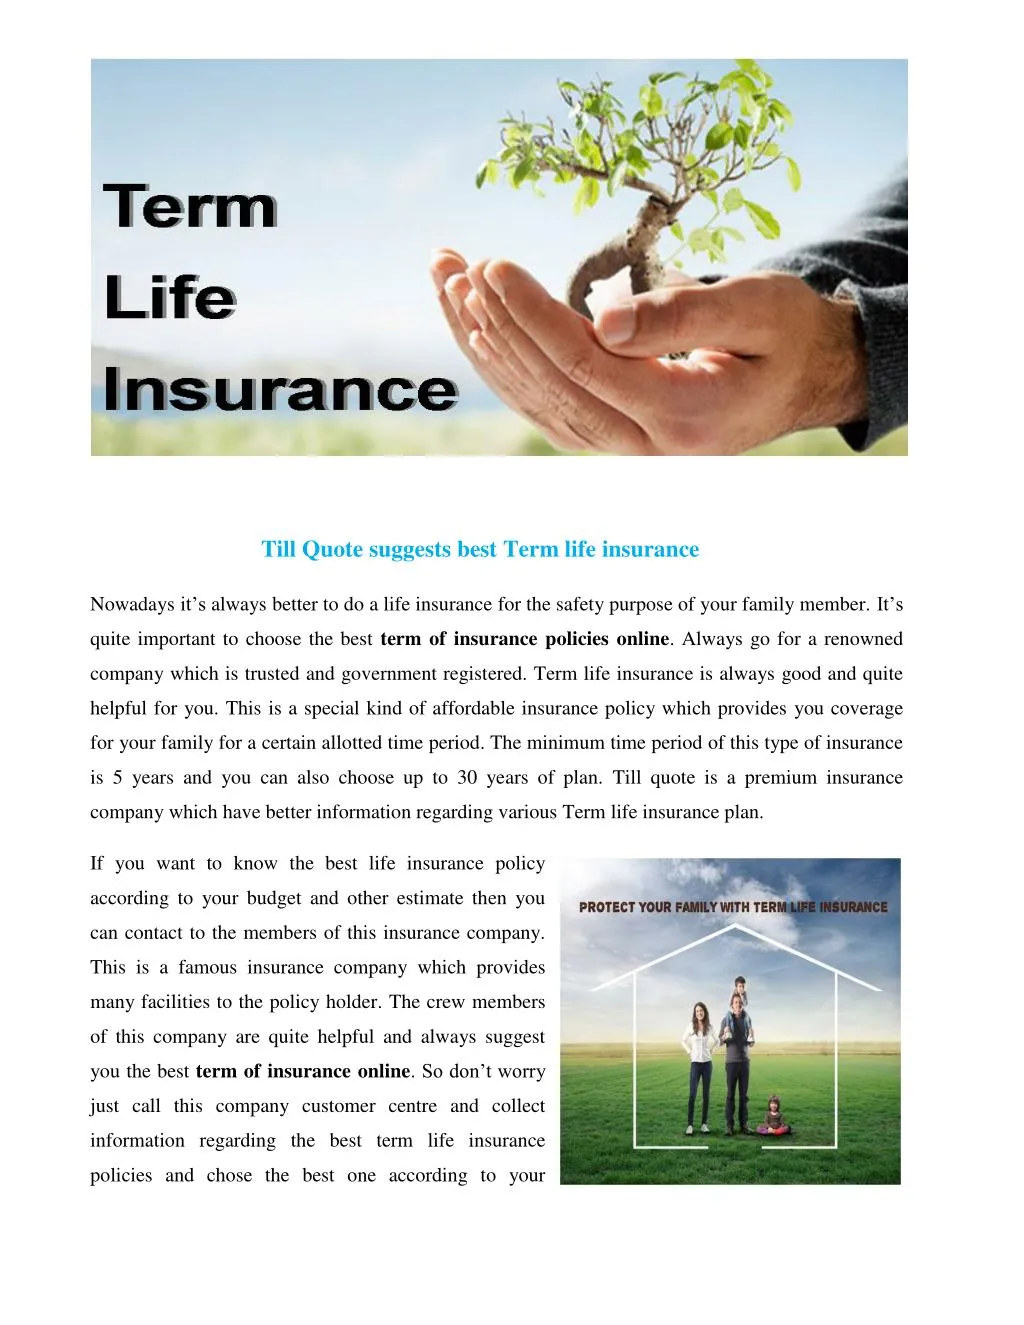 till quote suggests best term life insurance